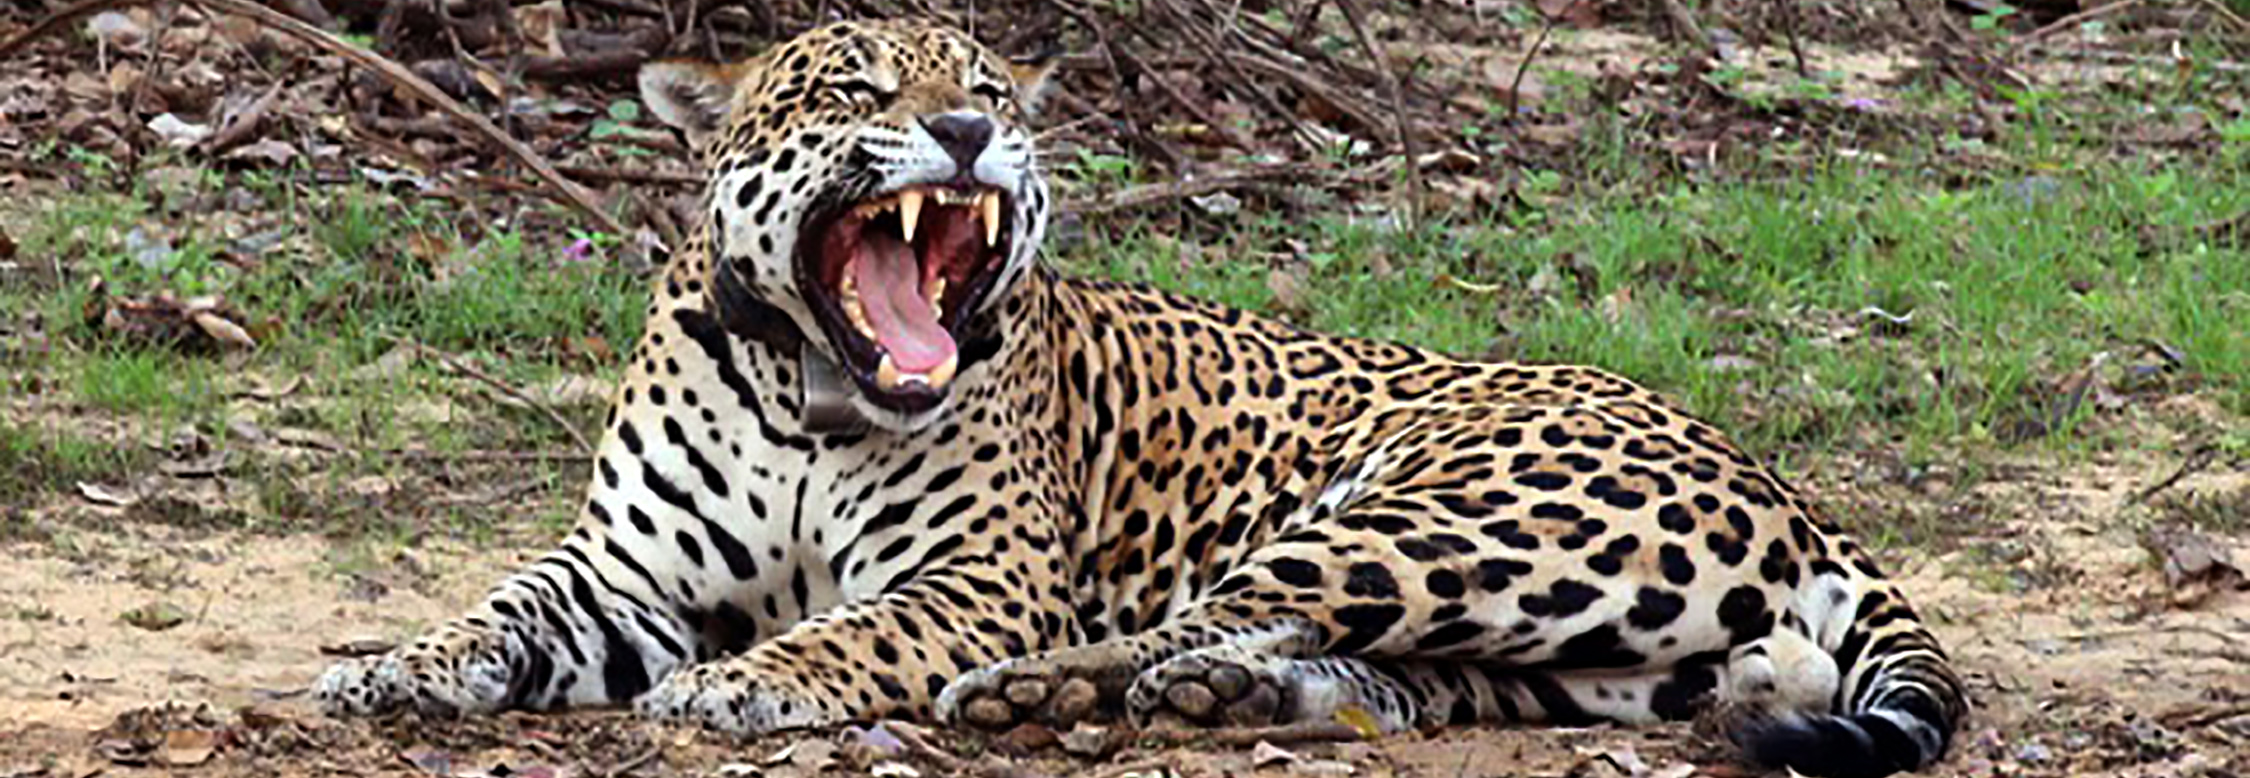 Jaguar male Rio Negro

By Charles J Sharp - Own work, from Sharp Photography, sharpphotography, CC BY-SA 4.0, https://commons.wikimedia.org/w/index.php?curid=44247571

